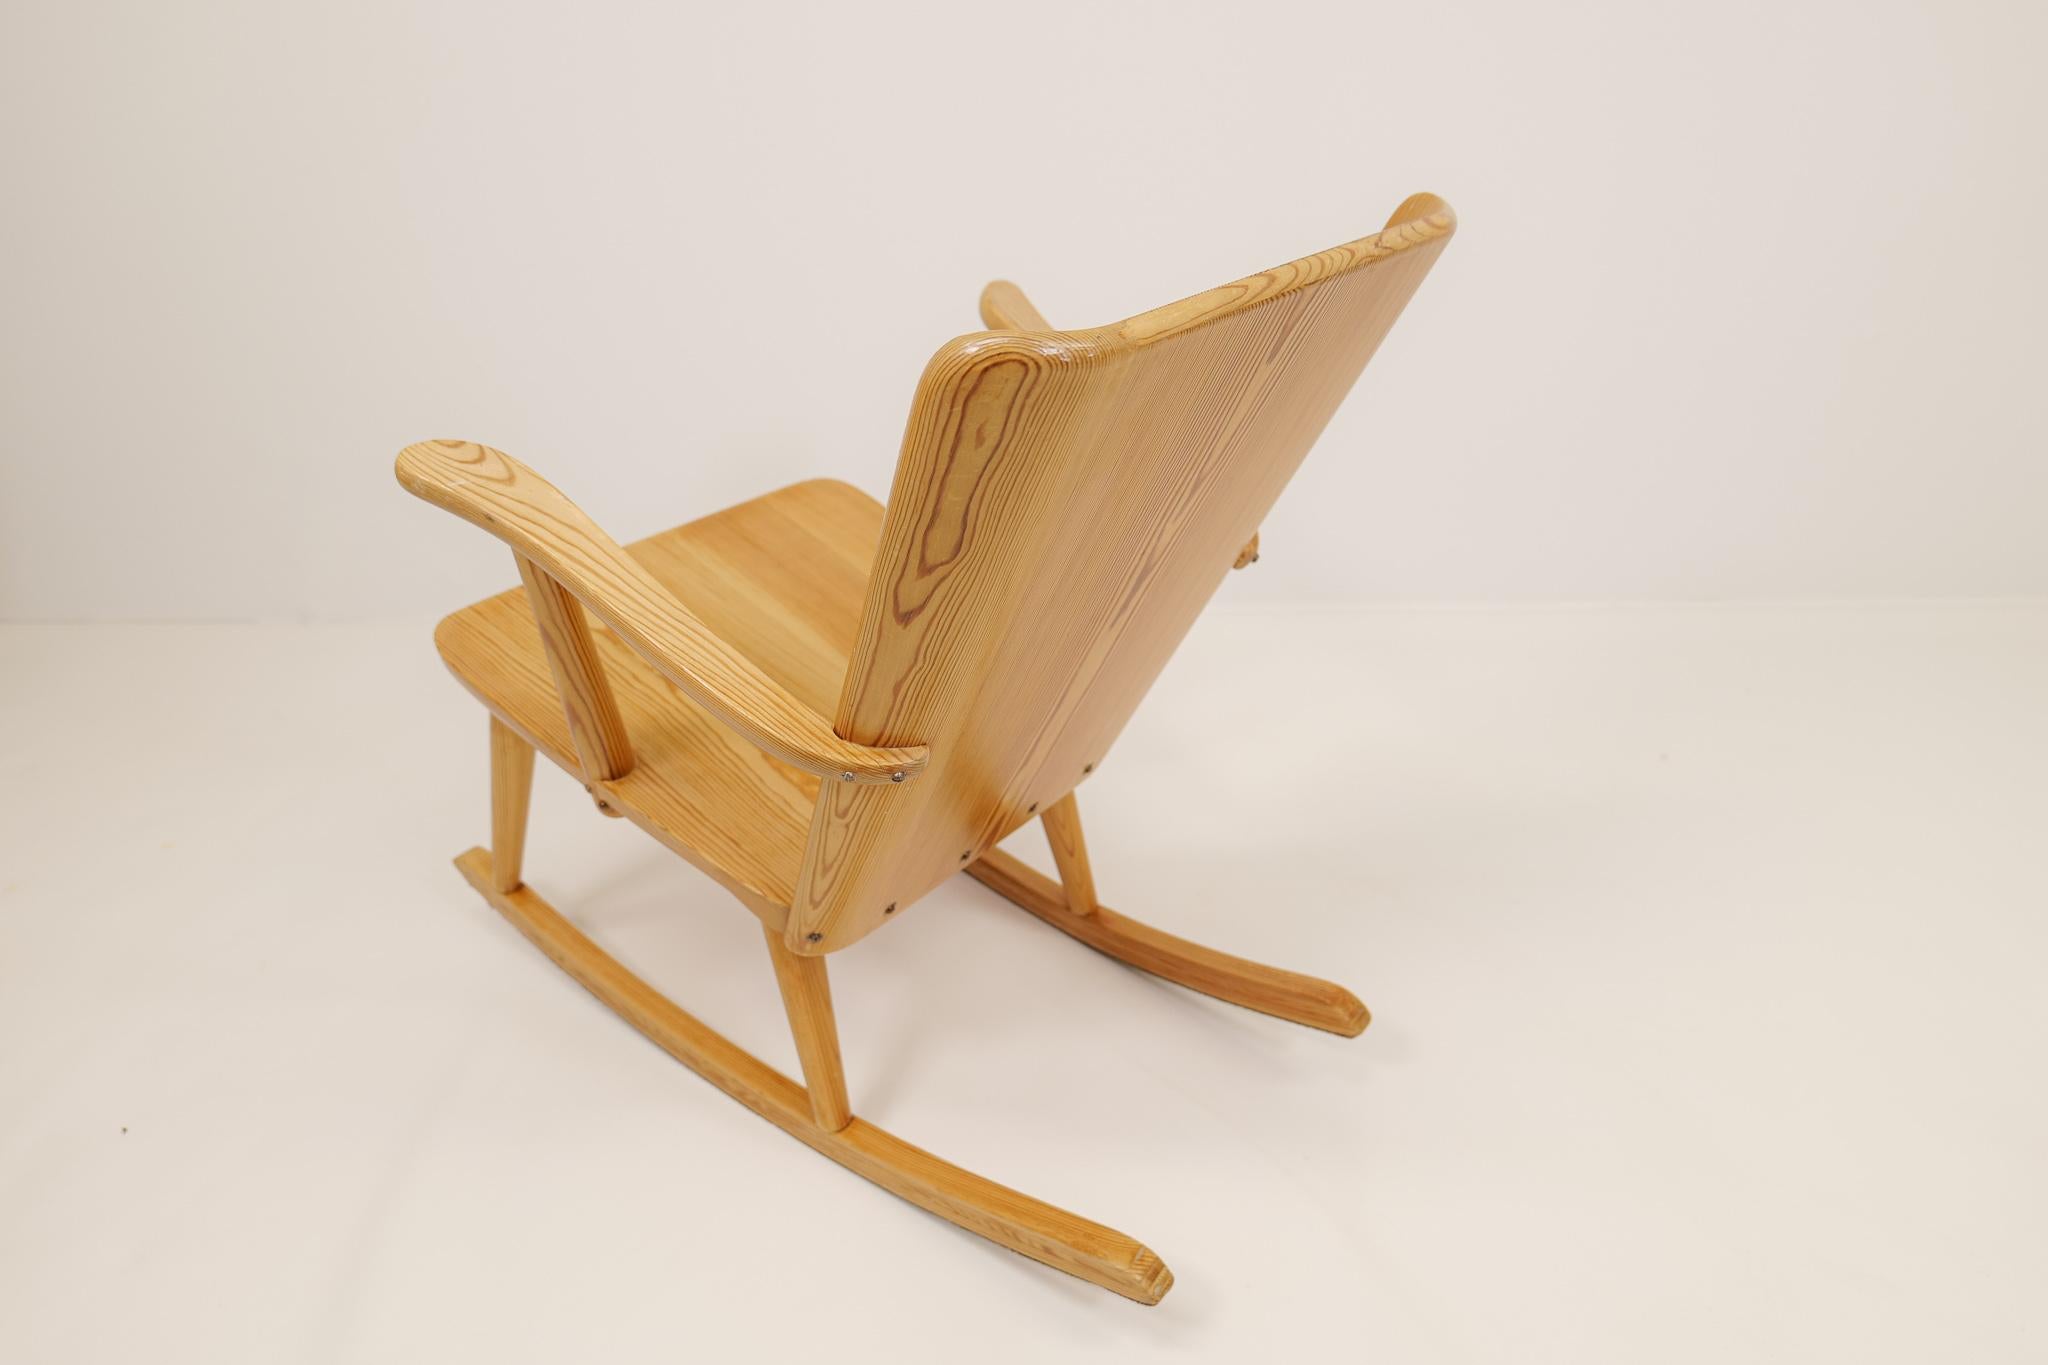 Midcentury Rocking Chair in Pine, Göran Malmvall, Sweden, 1940s For Sale 1